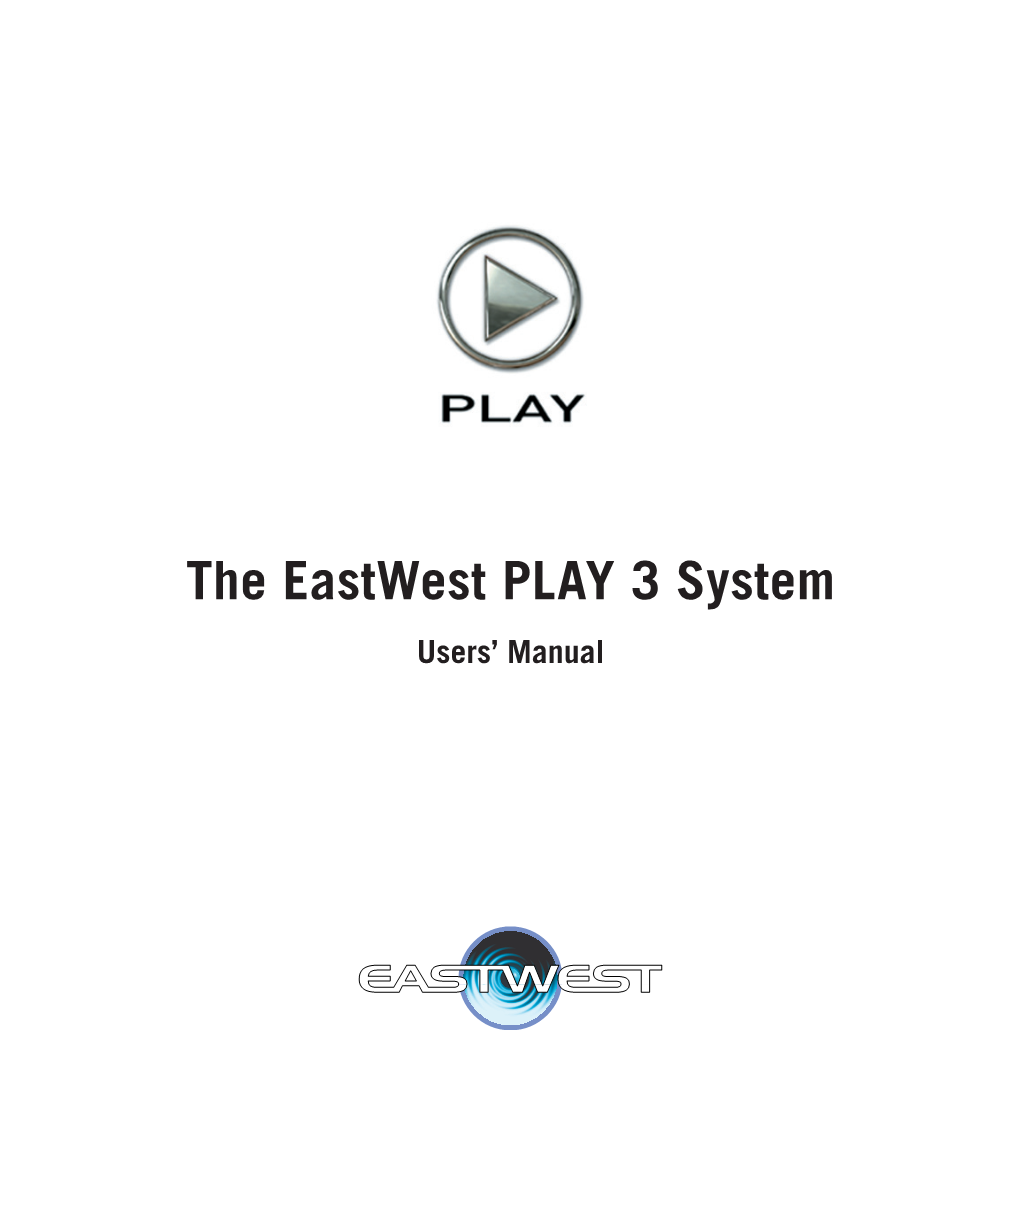 Eastwest PLAY 3 System Manual